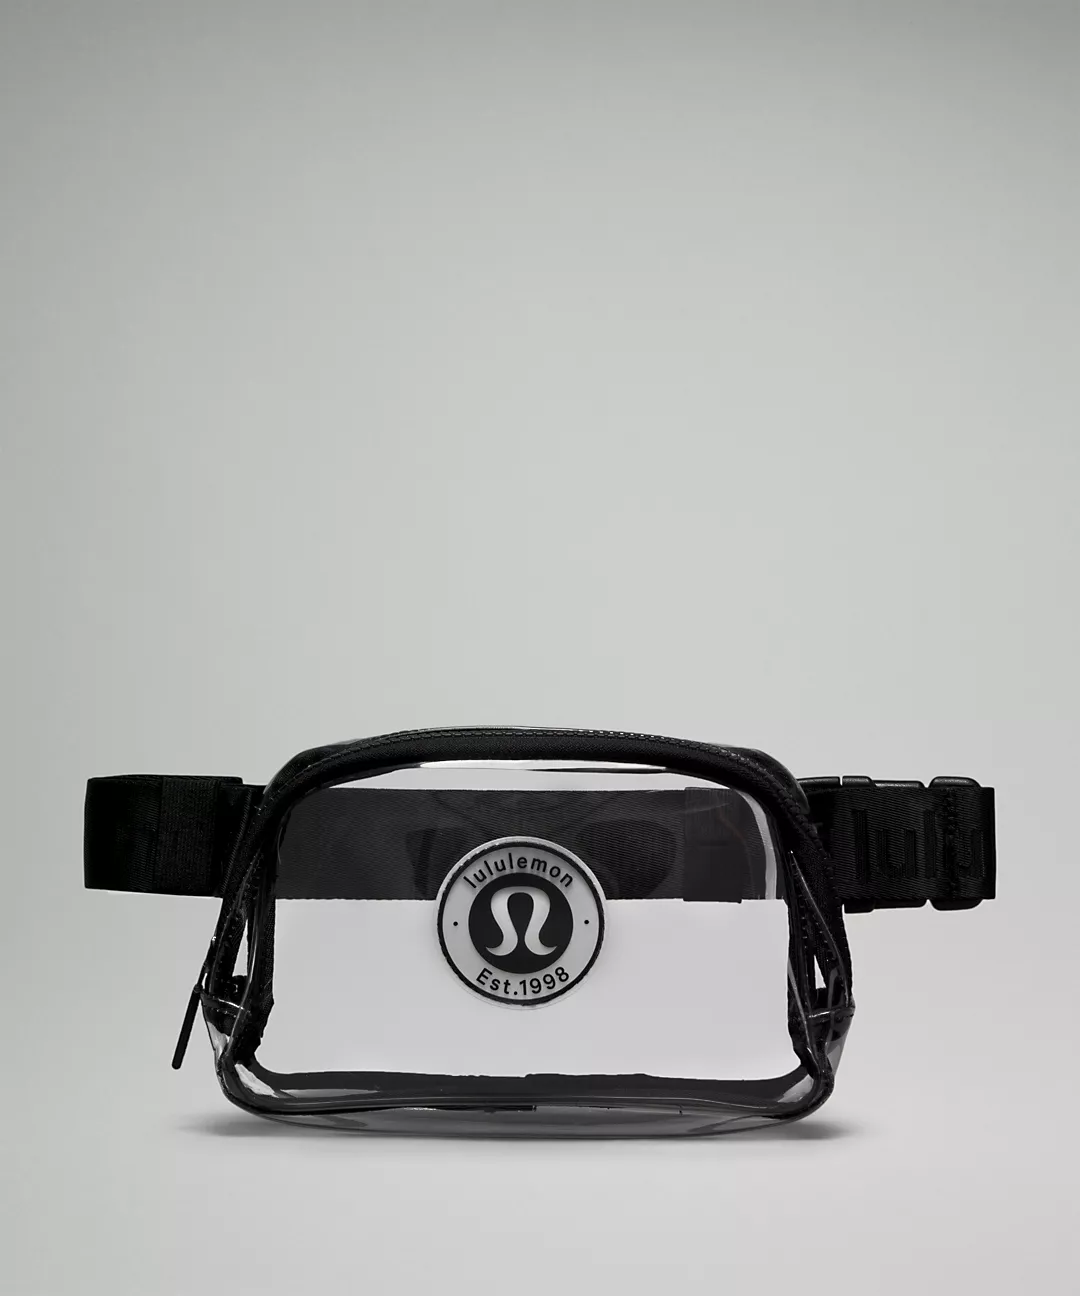 Lululemon Now Has A Clear Belt Bag: Shop It While You Can - Good Morning  America